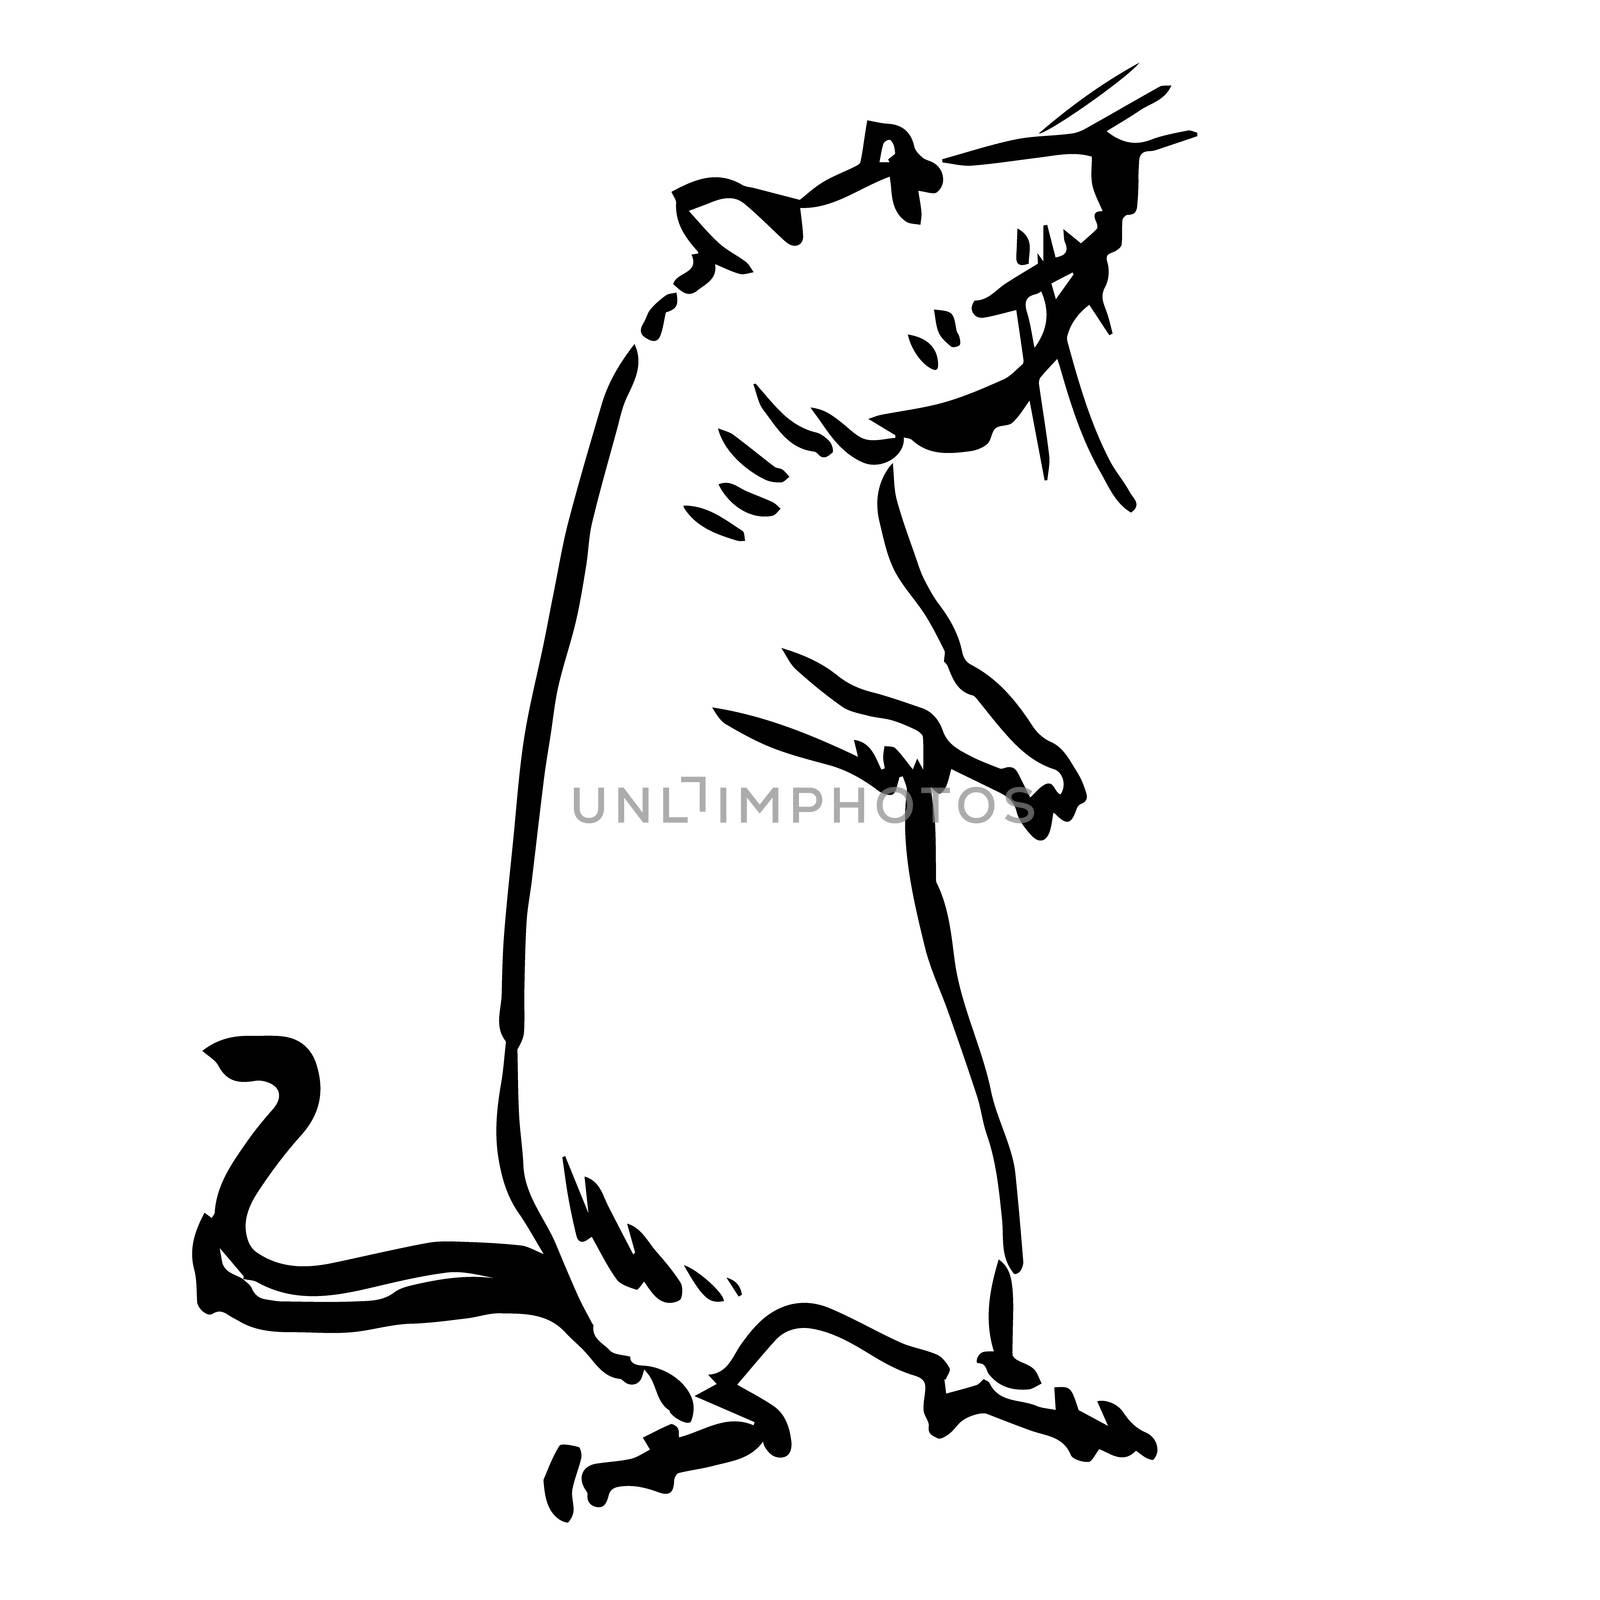 freehand sketch illustration of rat, mouse doodle hand drawn